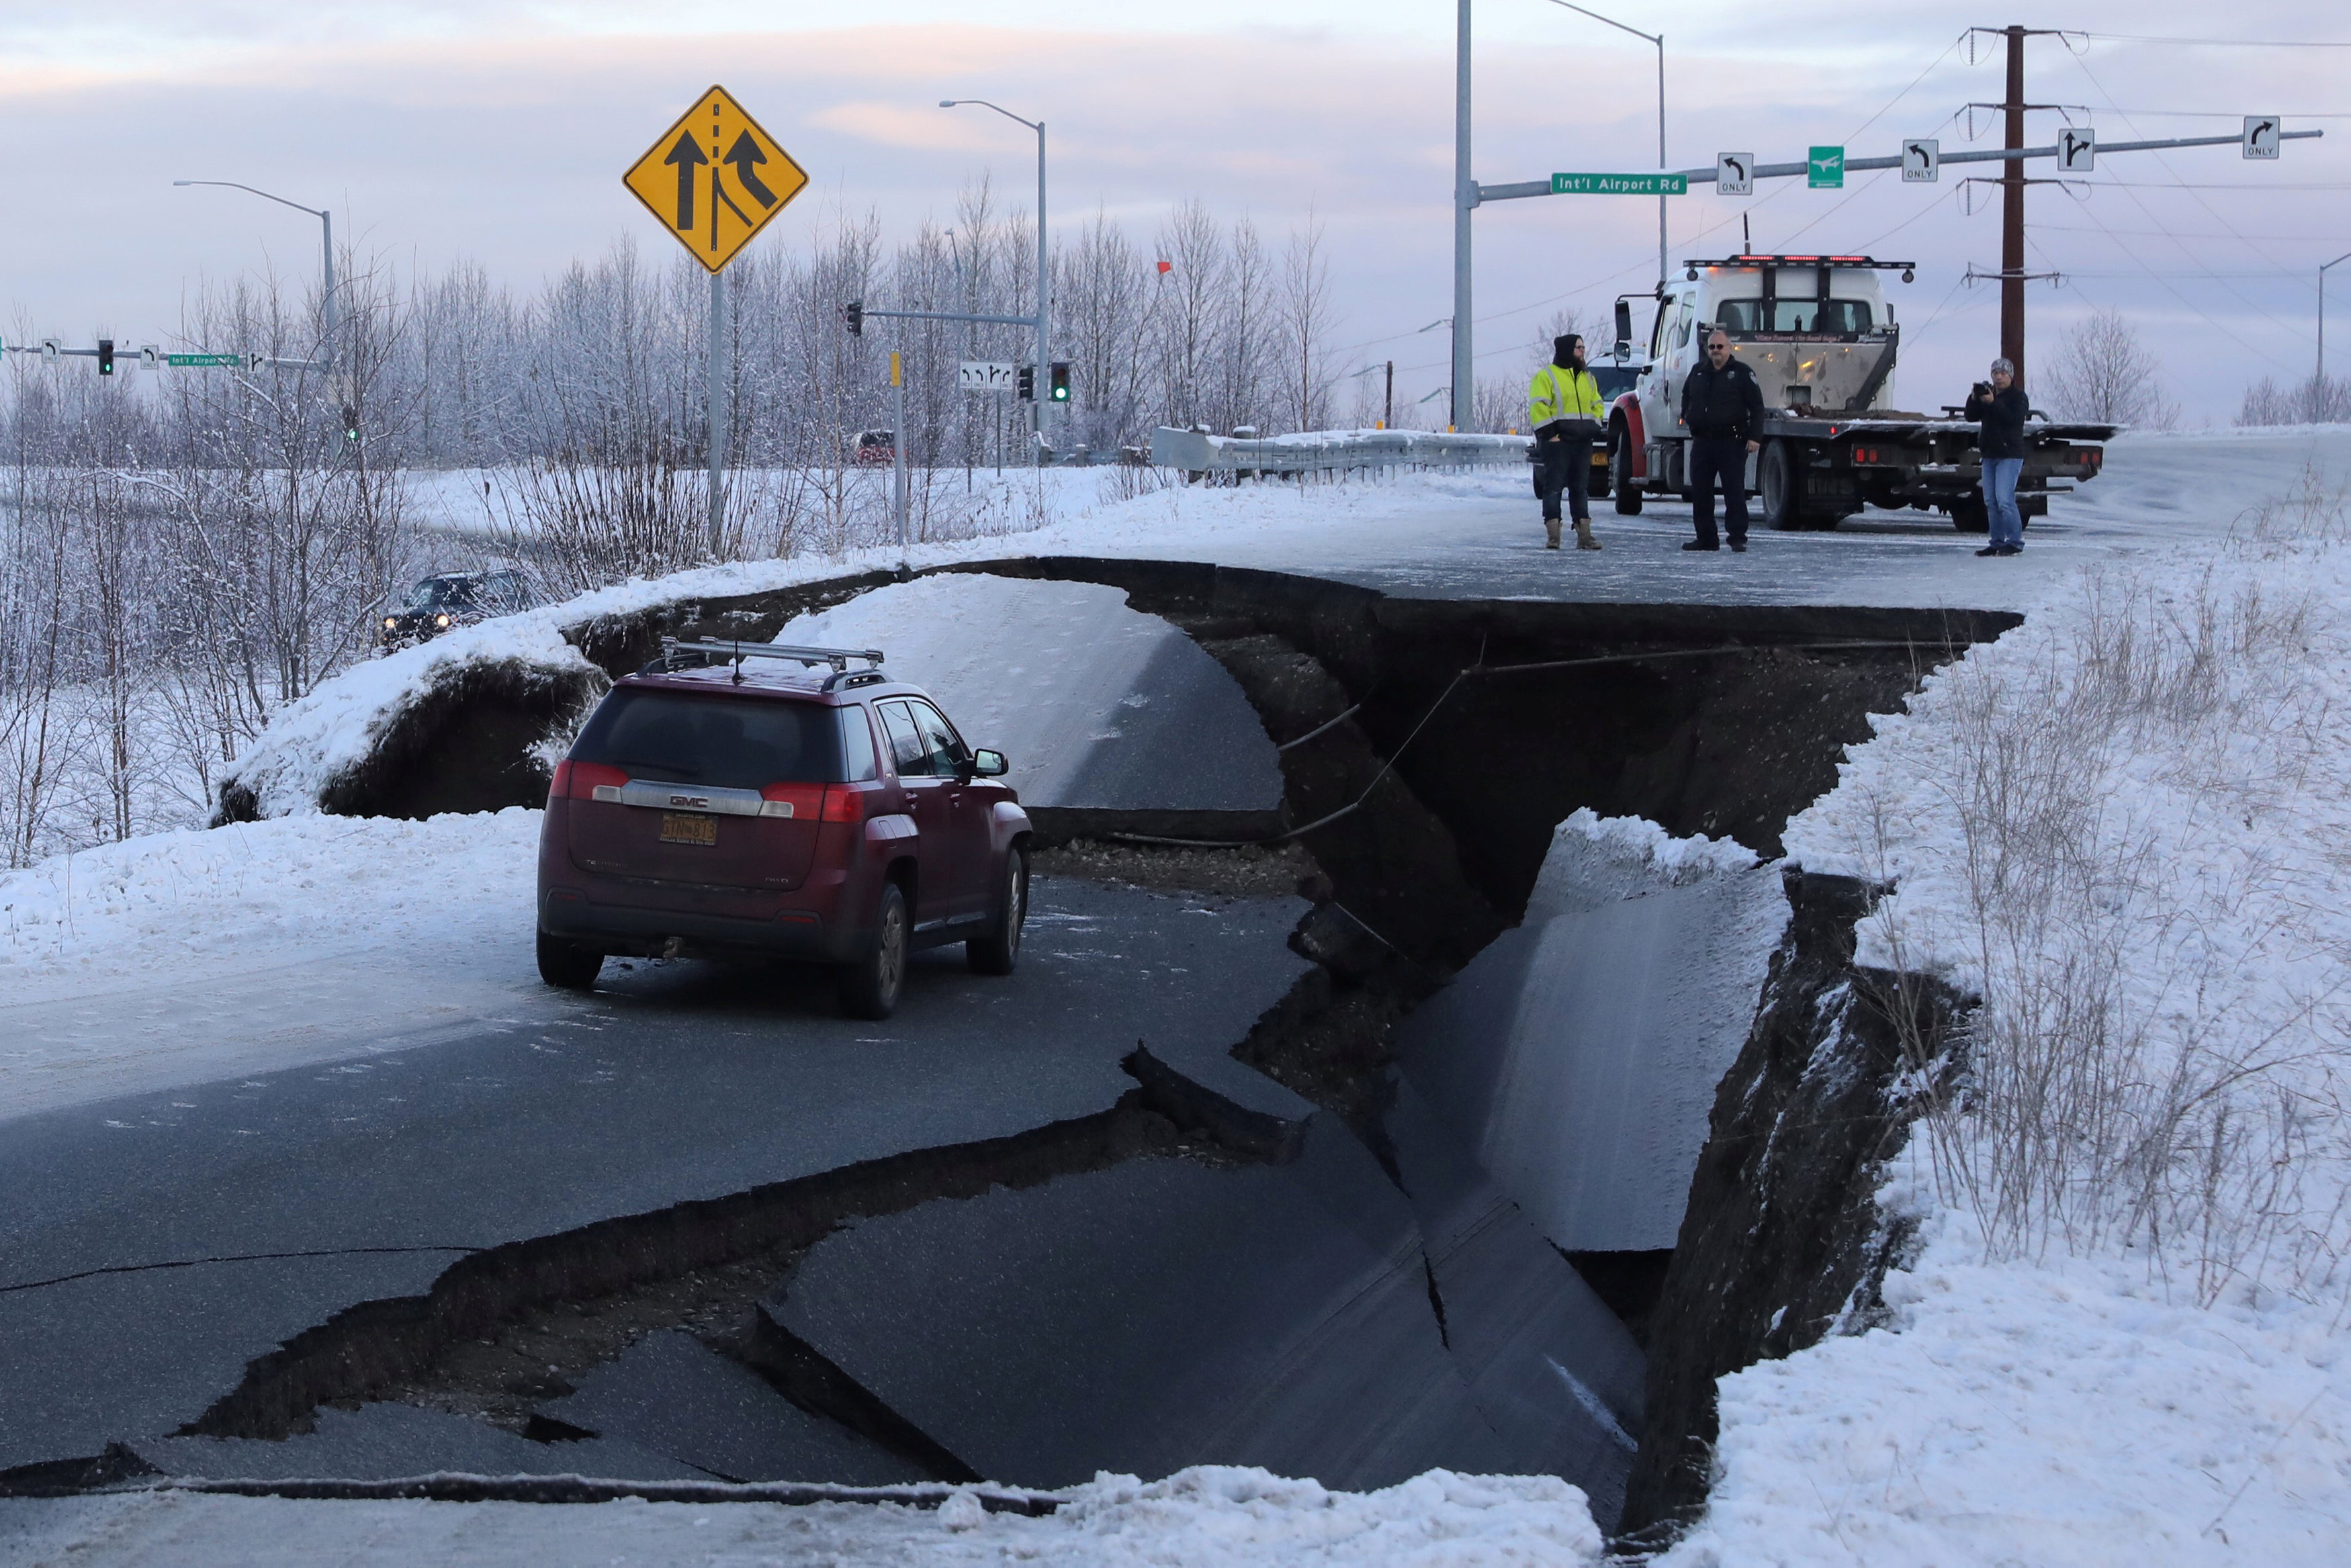 A stranded vehicle lies on a collapsed roadway near the airport after an earthquake in Anchorage, Alaska, U.S. November 30, 2018. REUTERS/Nathaniel Wilder